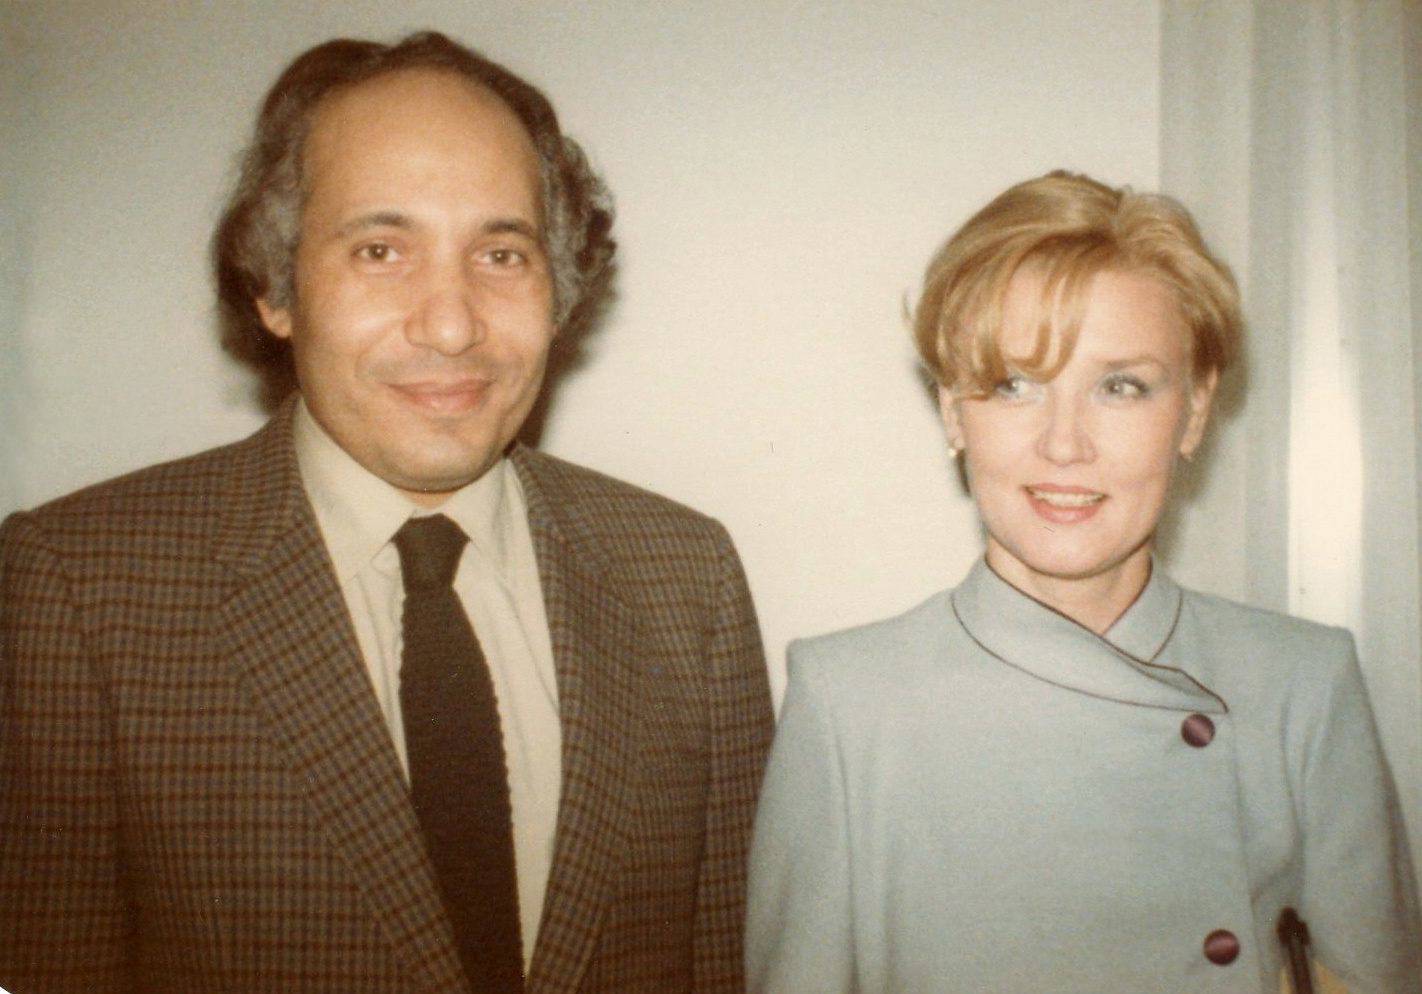 With Soviet actress Vera Alintova star of 'Moscow Does Not Believe in Tears' the BFF Oscar winner of 1980. Alintova was Farouq's Cine-Club guest in 1981